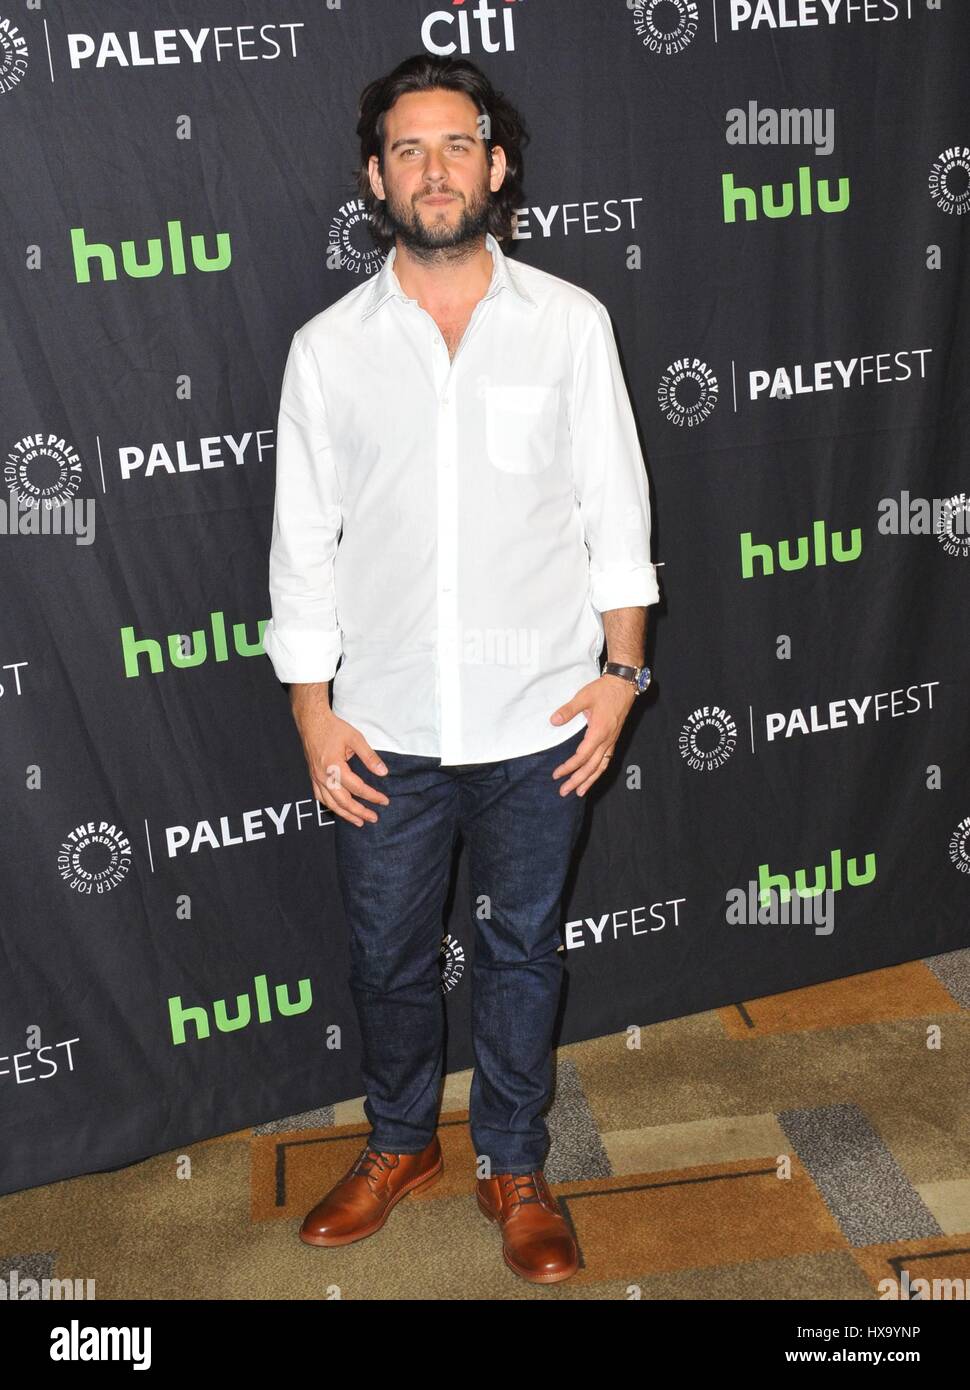 Los Angeles, CA, USA. 25th Mar, 2017. Roberto Patino in attendance for WESTWORLD at 34th Annual Paleyfest Los Angeles, The Dolby Theatre at Hollywood and Highland Center, Los Angeles, CA March 25, 2017. Credit: Dee Cercone/Everett Collection/Alamy Live News Stock Photo